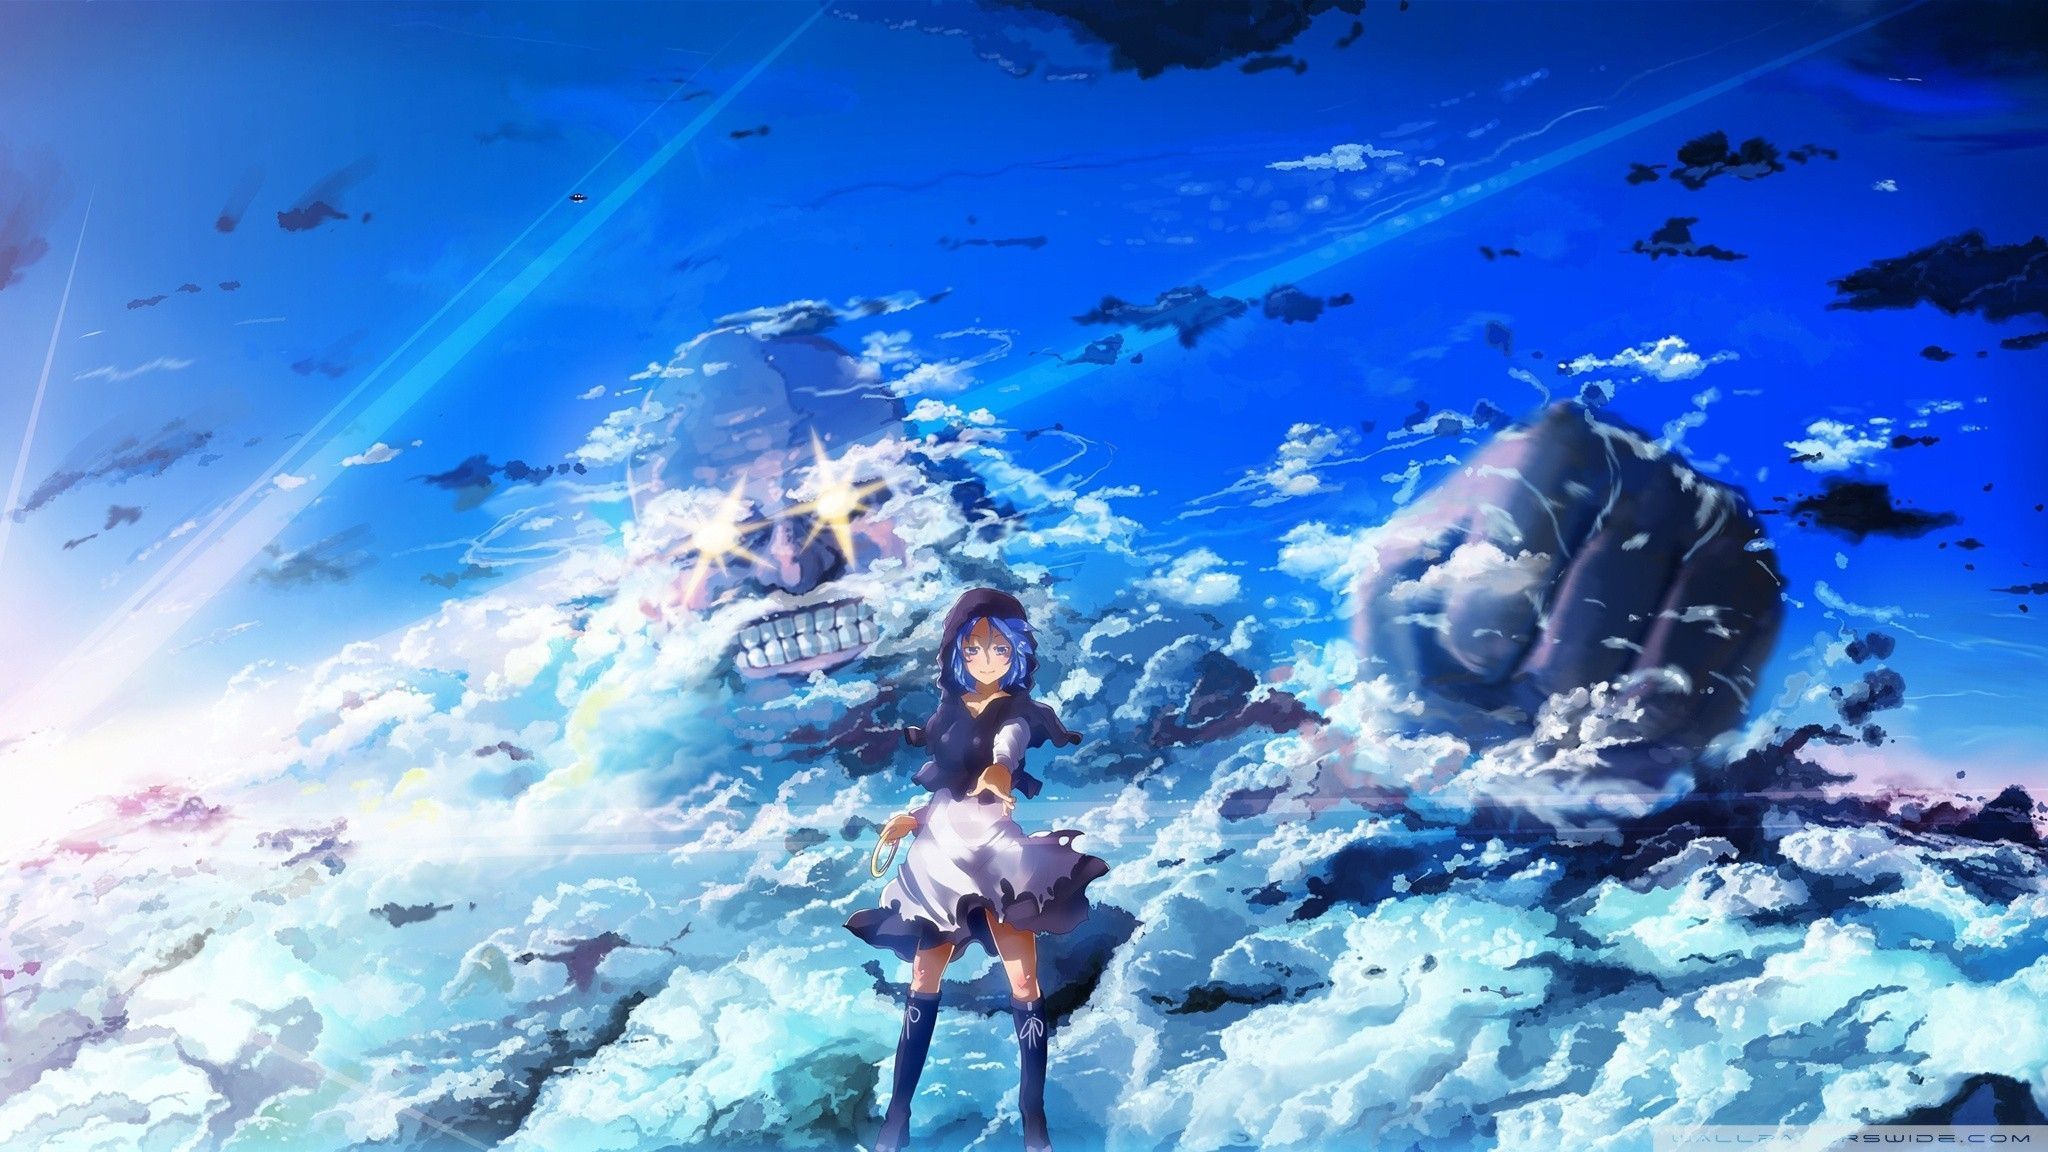 Anime girl standing on the clouds wallpaper background - 2048x1152